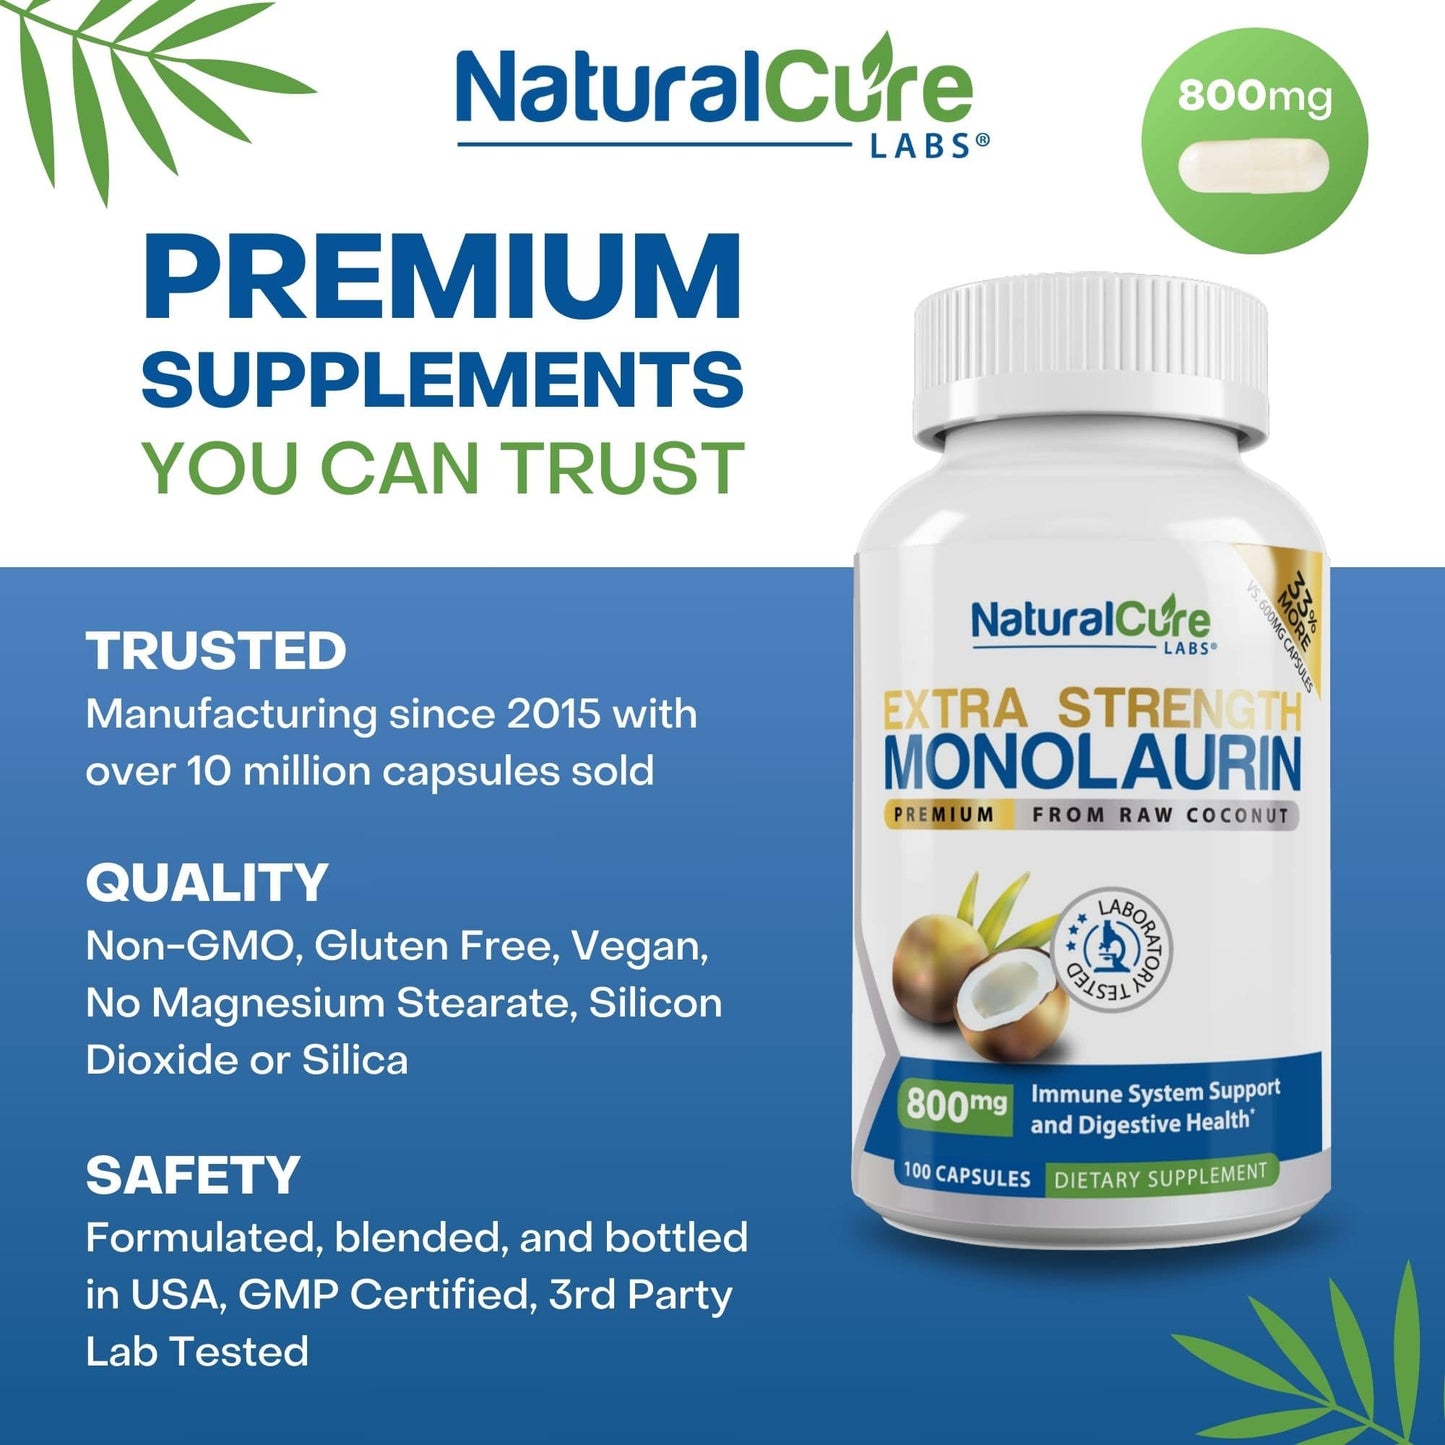 
                  
                    A bottle of Natural Cure Labs Extra Strength Monolaurin 800mg capsules, indicating the product's efficacy in providing monolaurin benefits for immune system support and digestive health, made from premium raw coconut.
                  
                